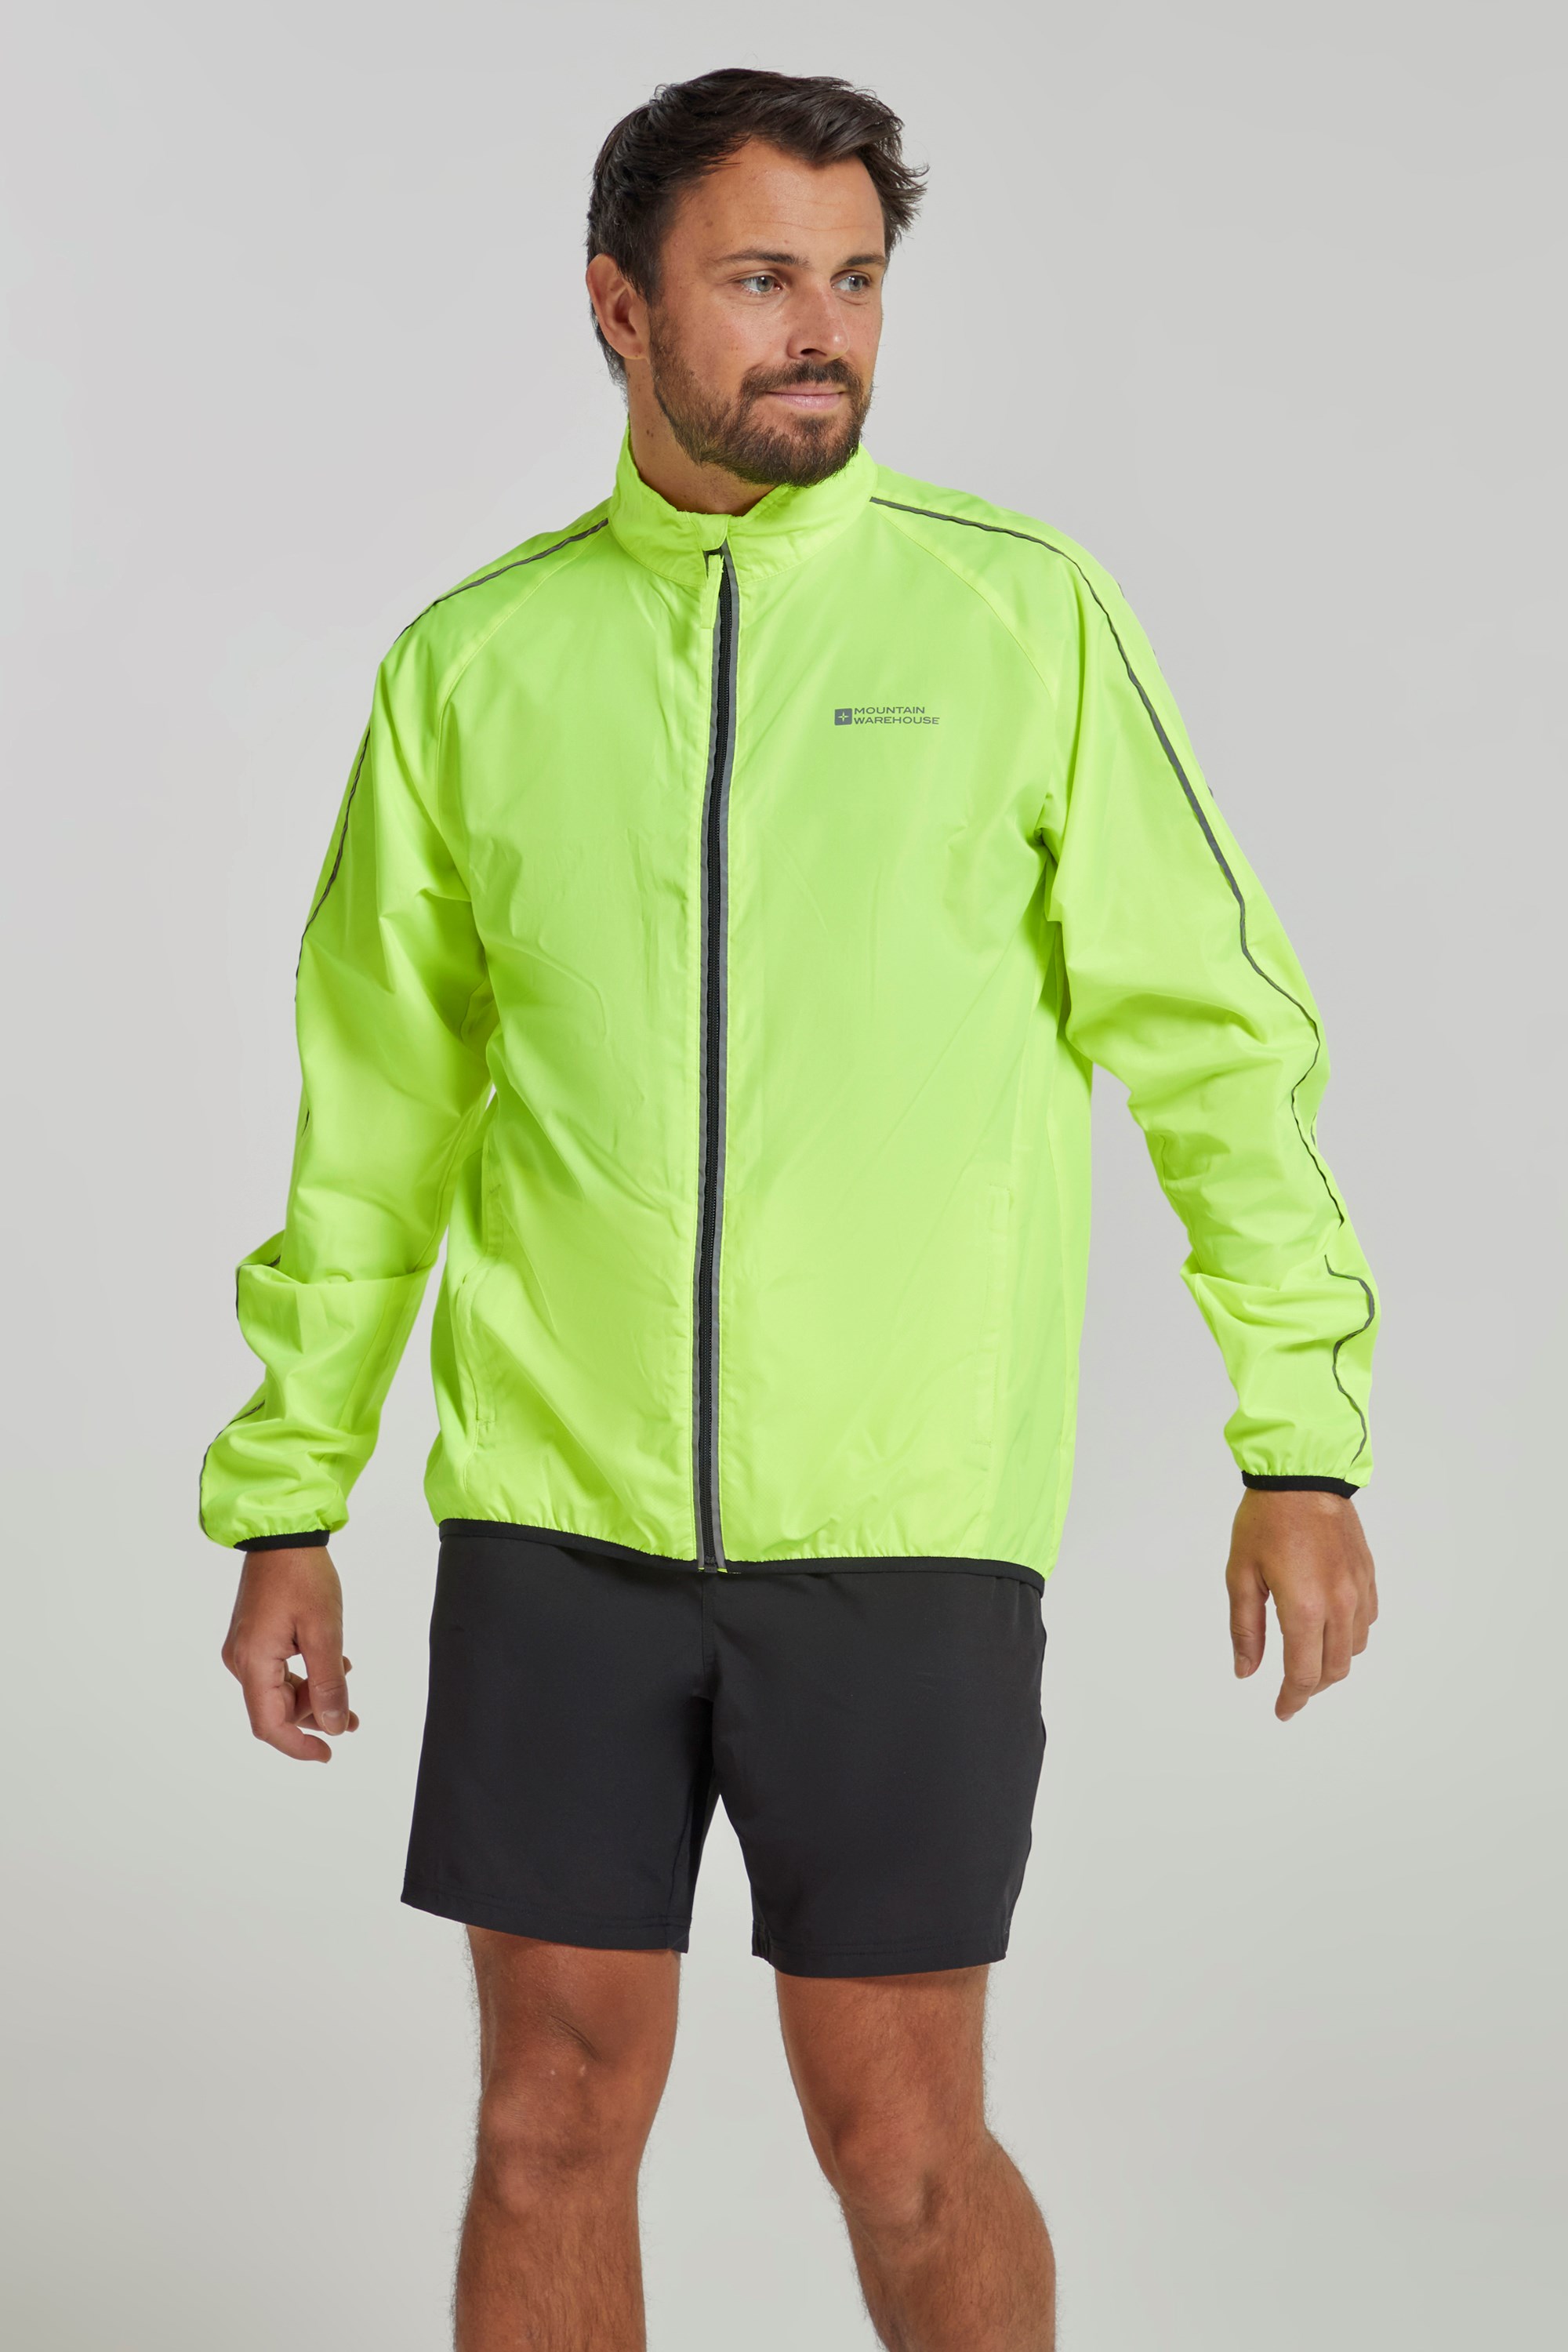 Force Mens Reflective Water-resistant Running Jacket - Yellow